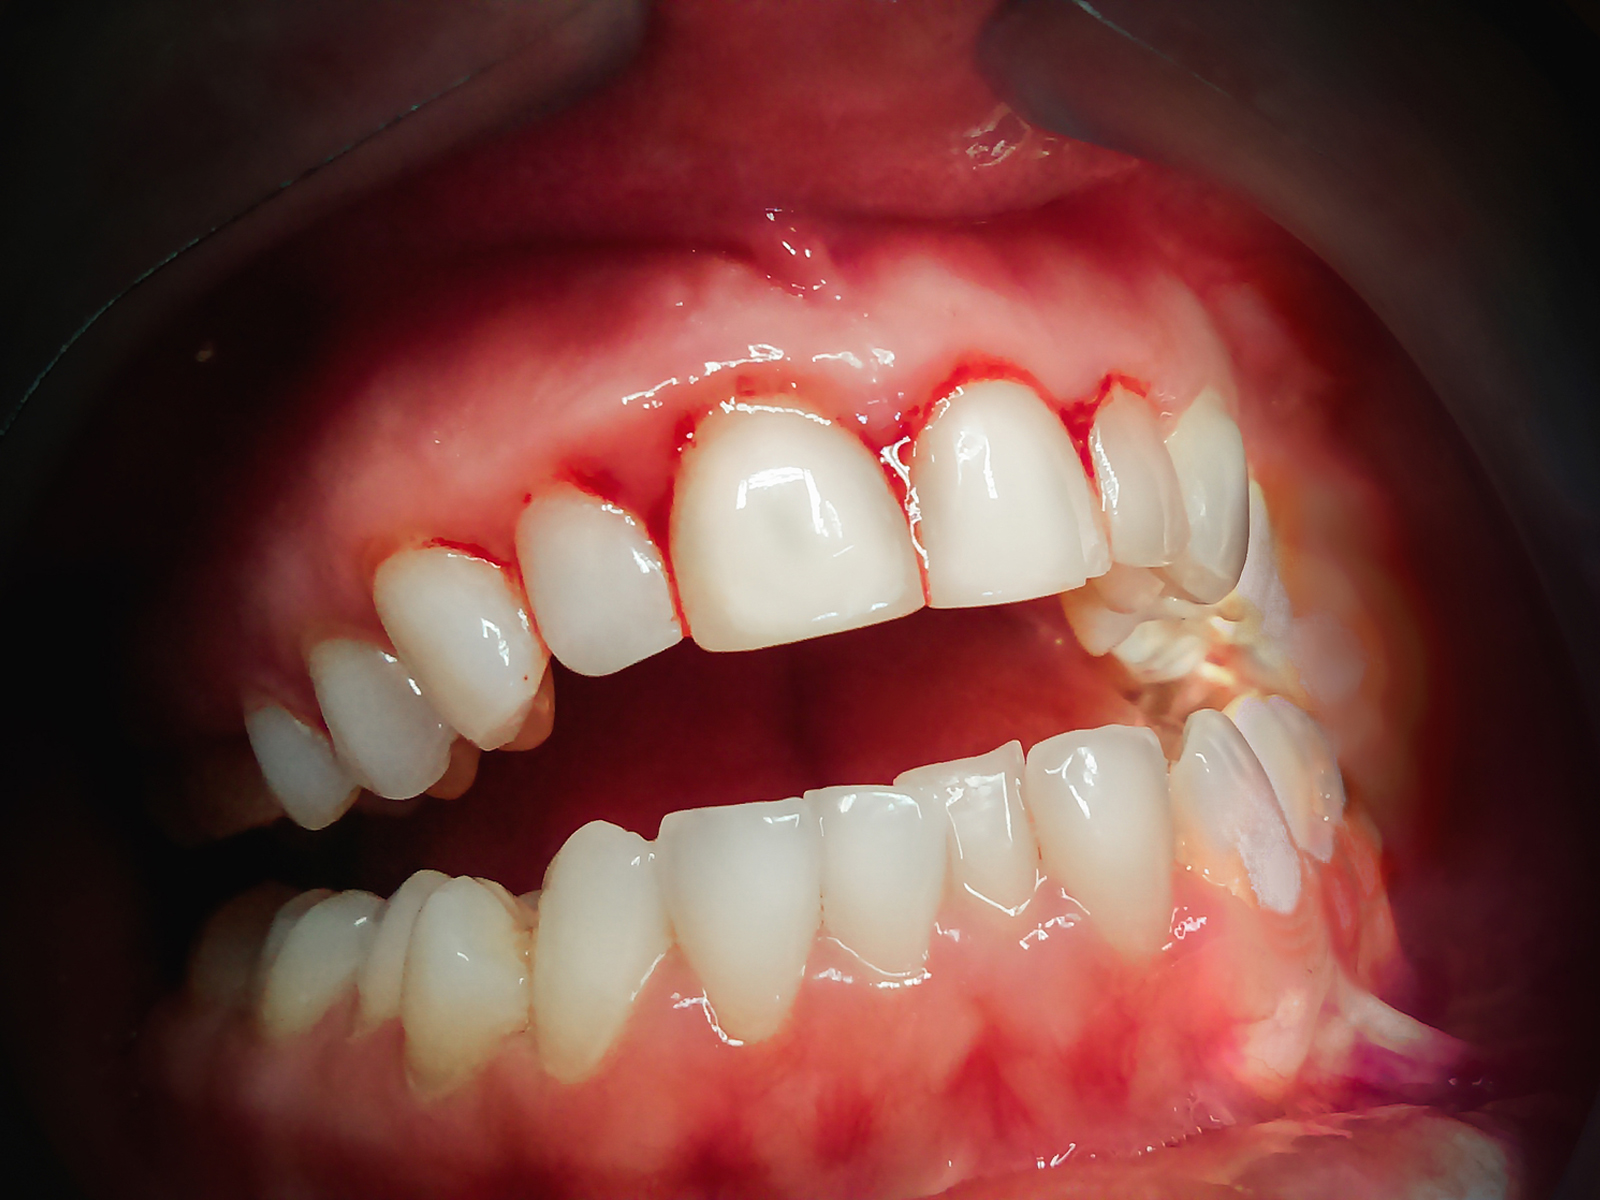 What happens if bleeding gums are not treated?